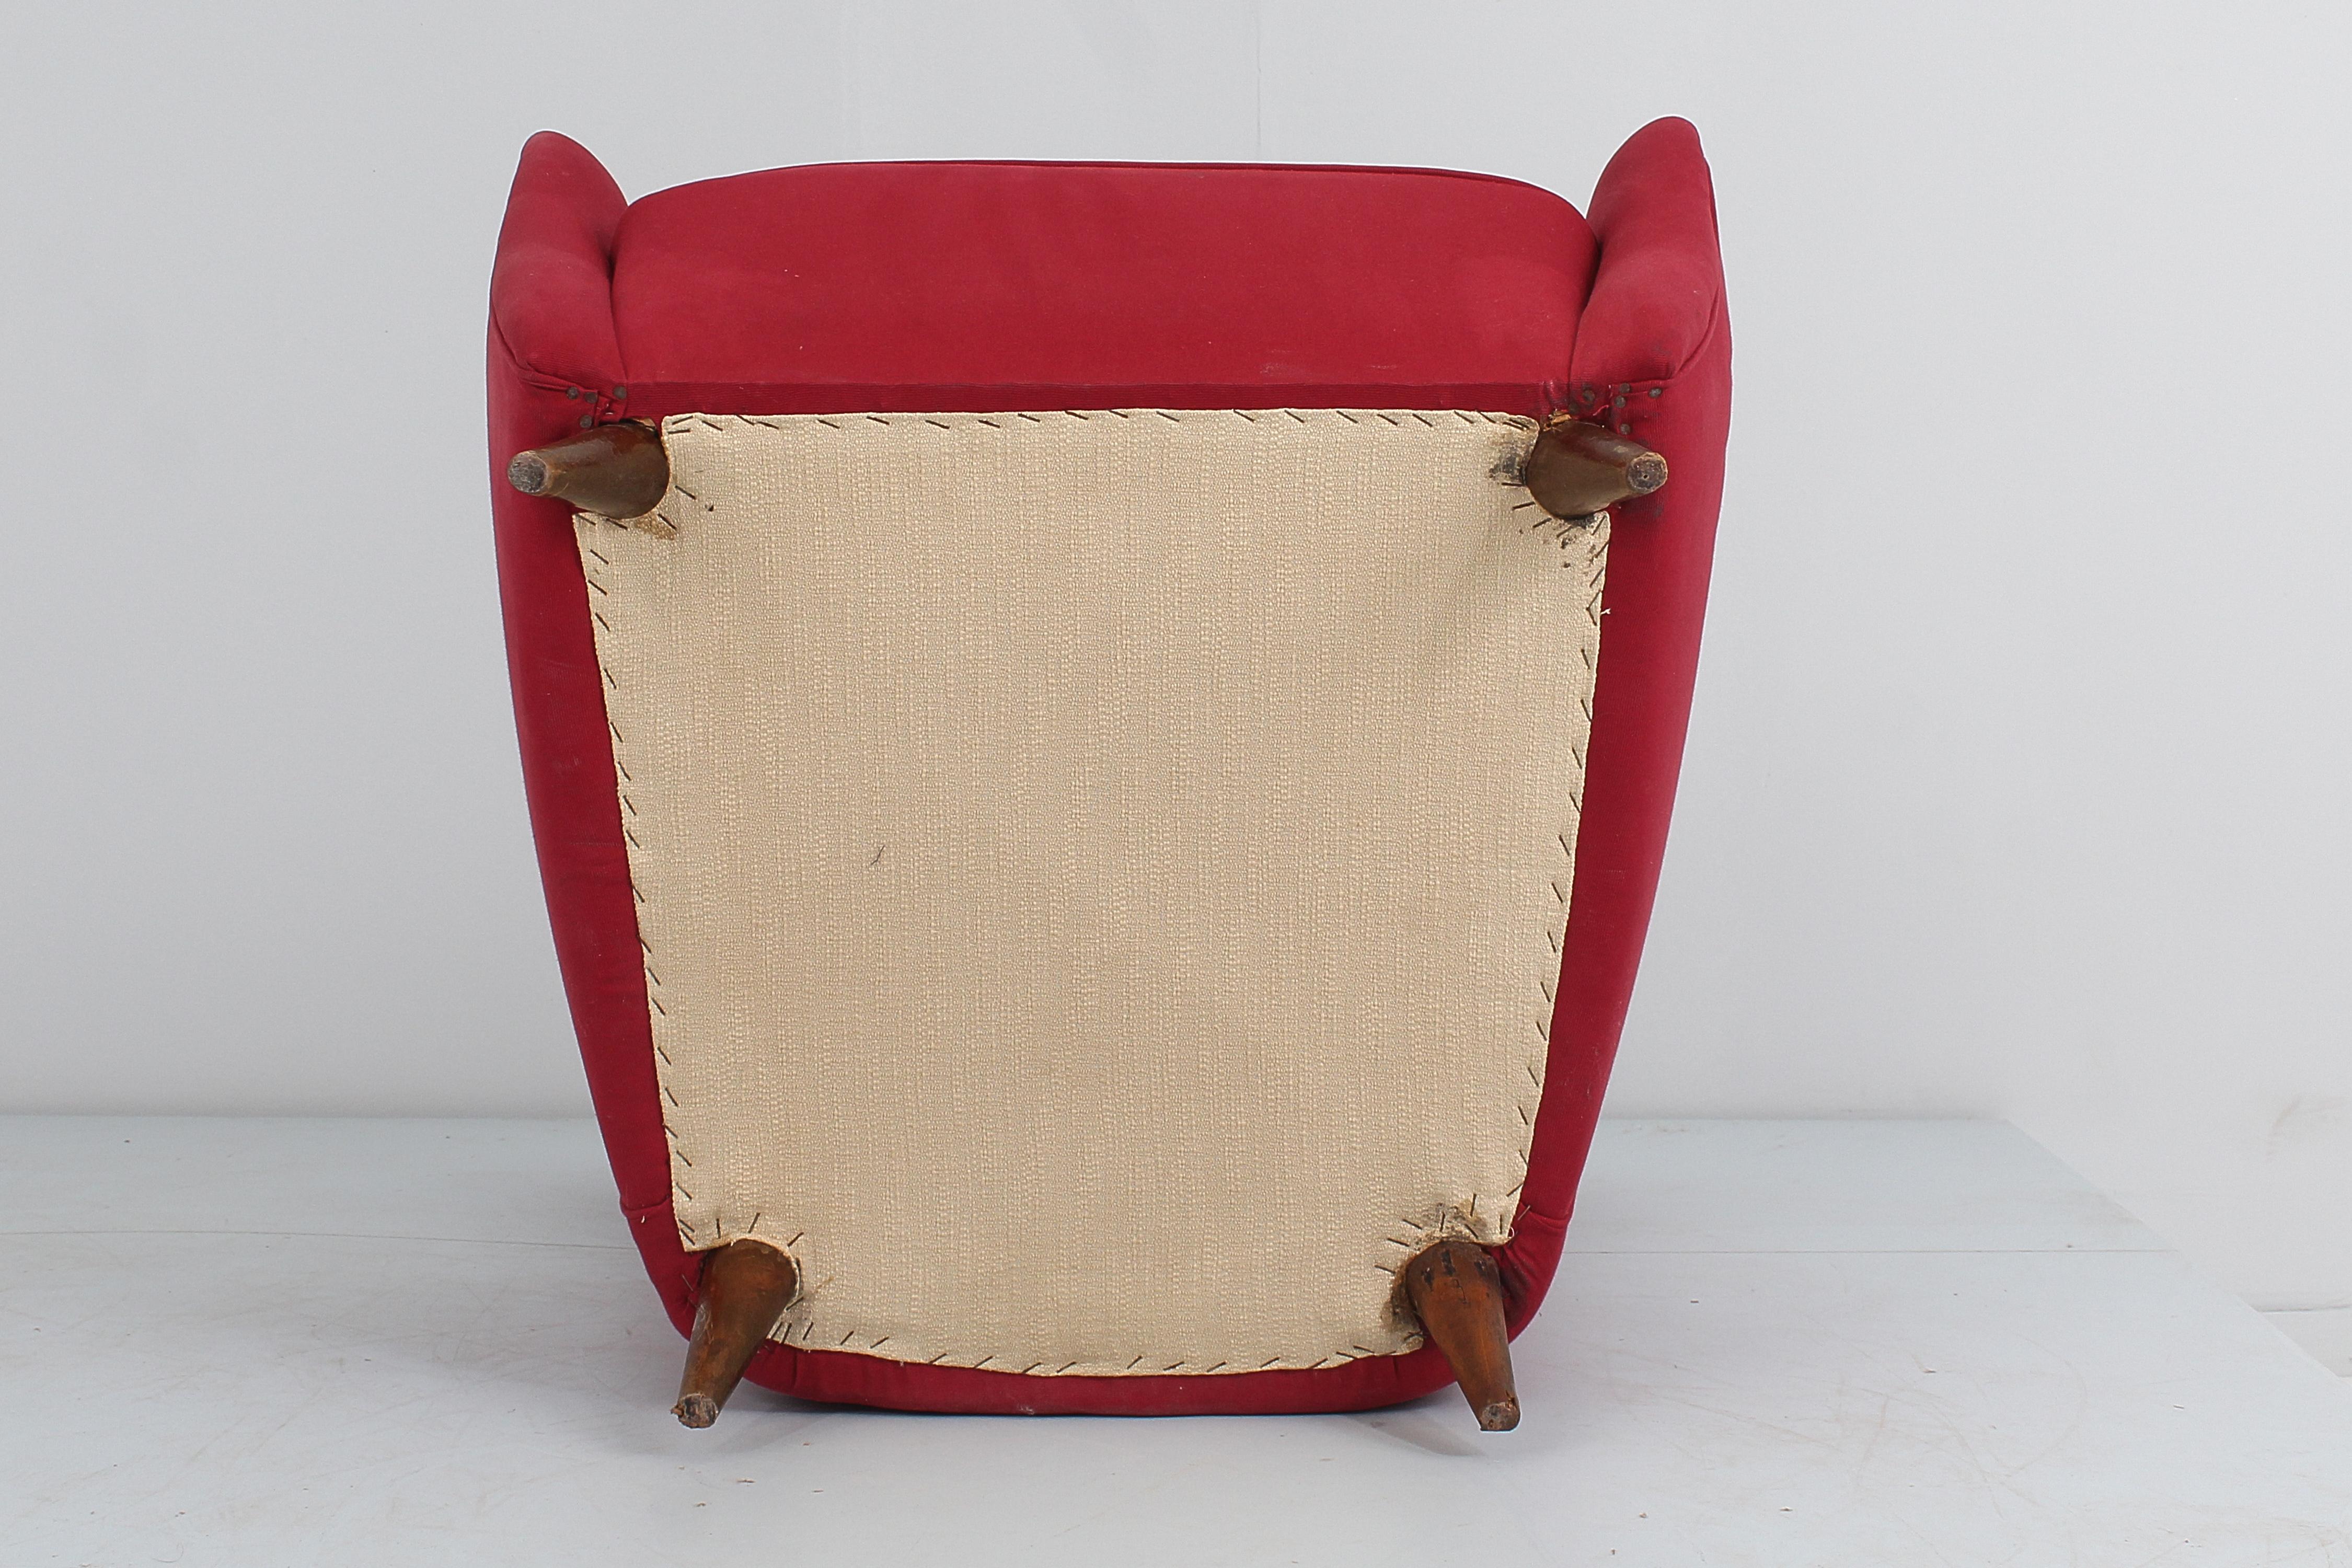 Midcentury Giò Ponti Style Wood and Red Fabric Armchair, circa 1950s Italy  For Sale 10